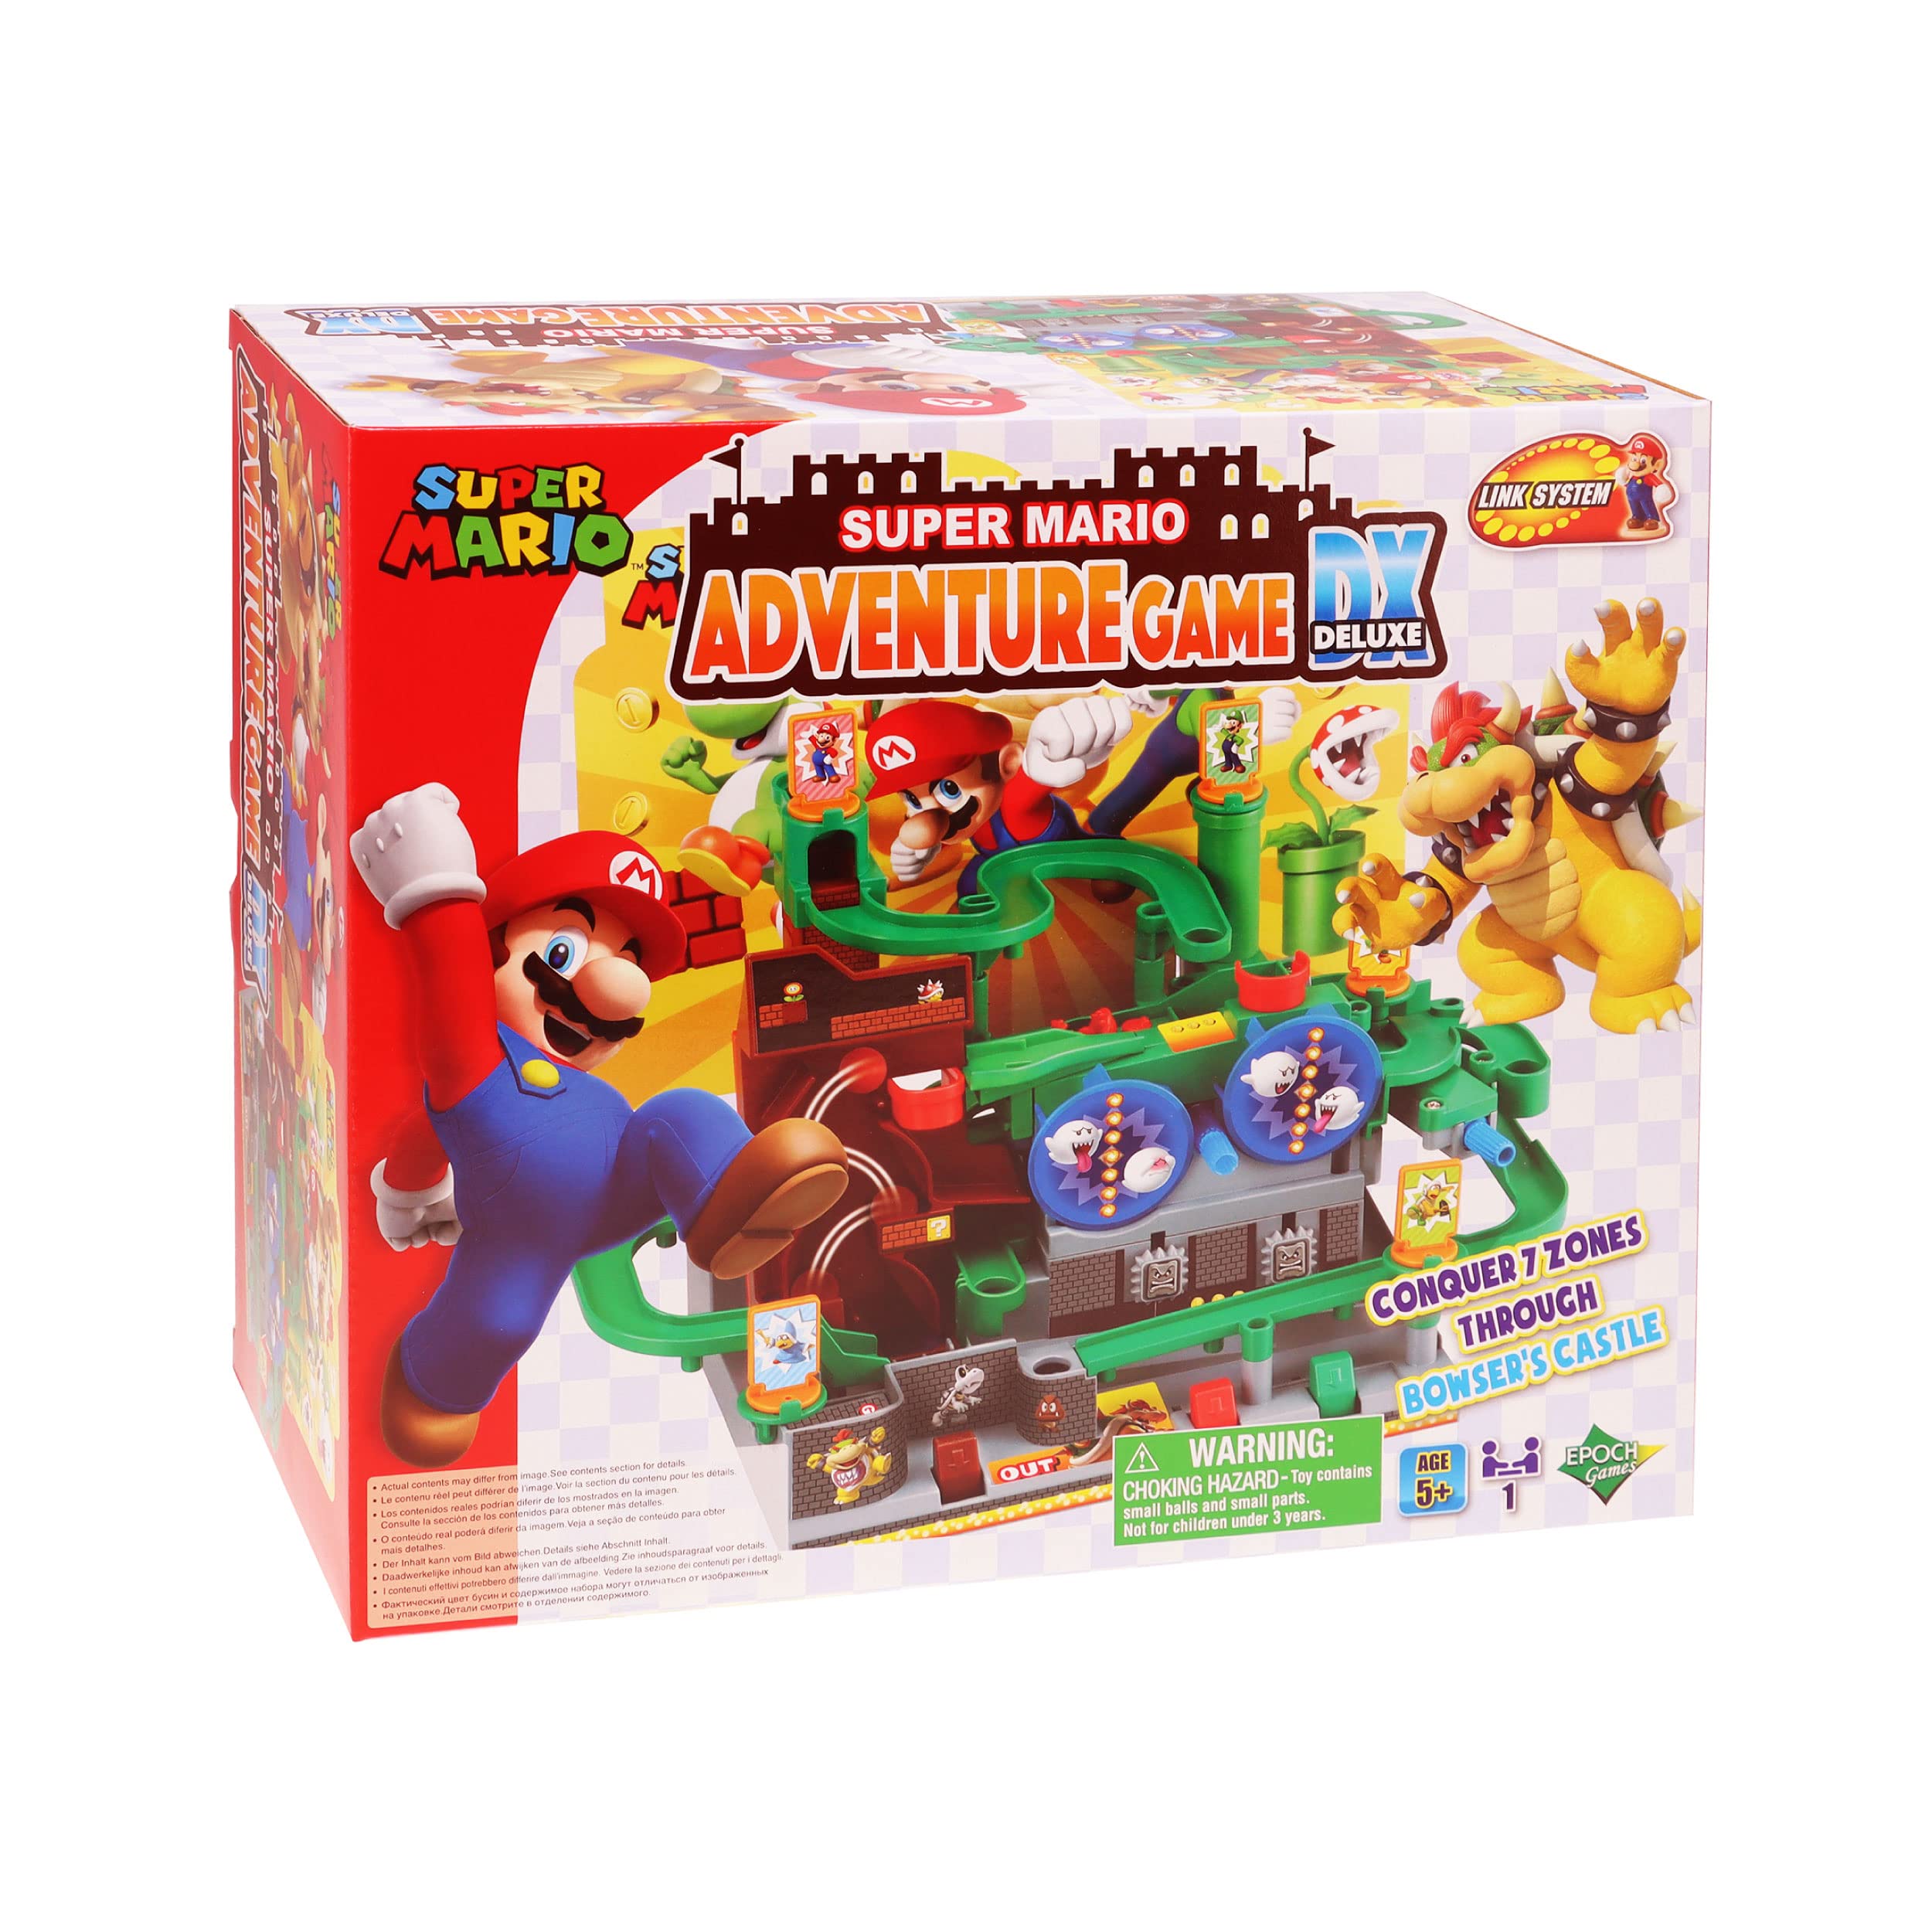 EPOCH Super Mario Adventure Game DX, Tabletop Skill and Action Game with Collectible Action Figures